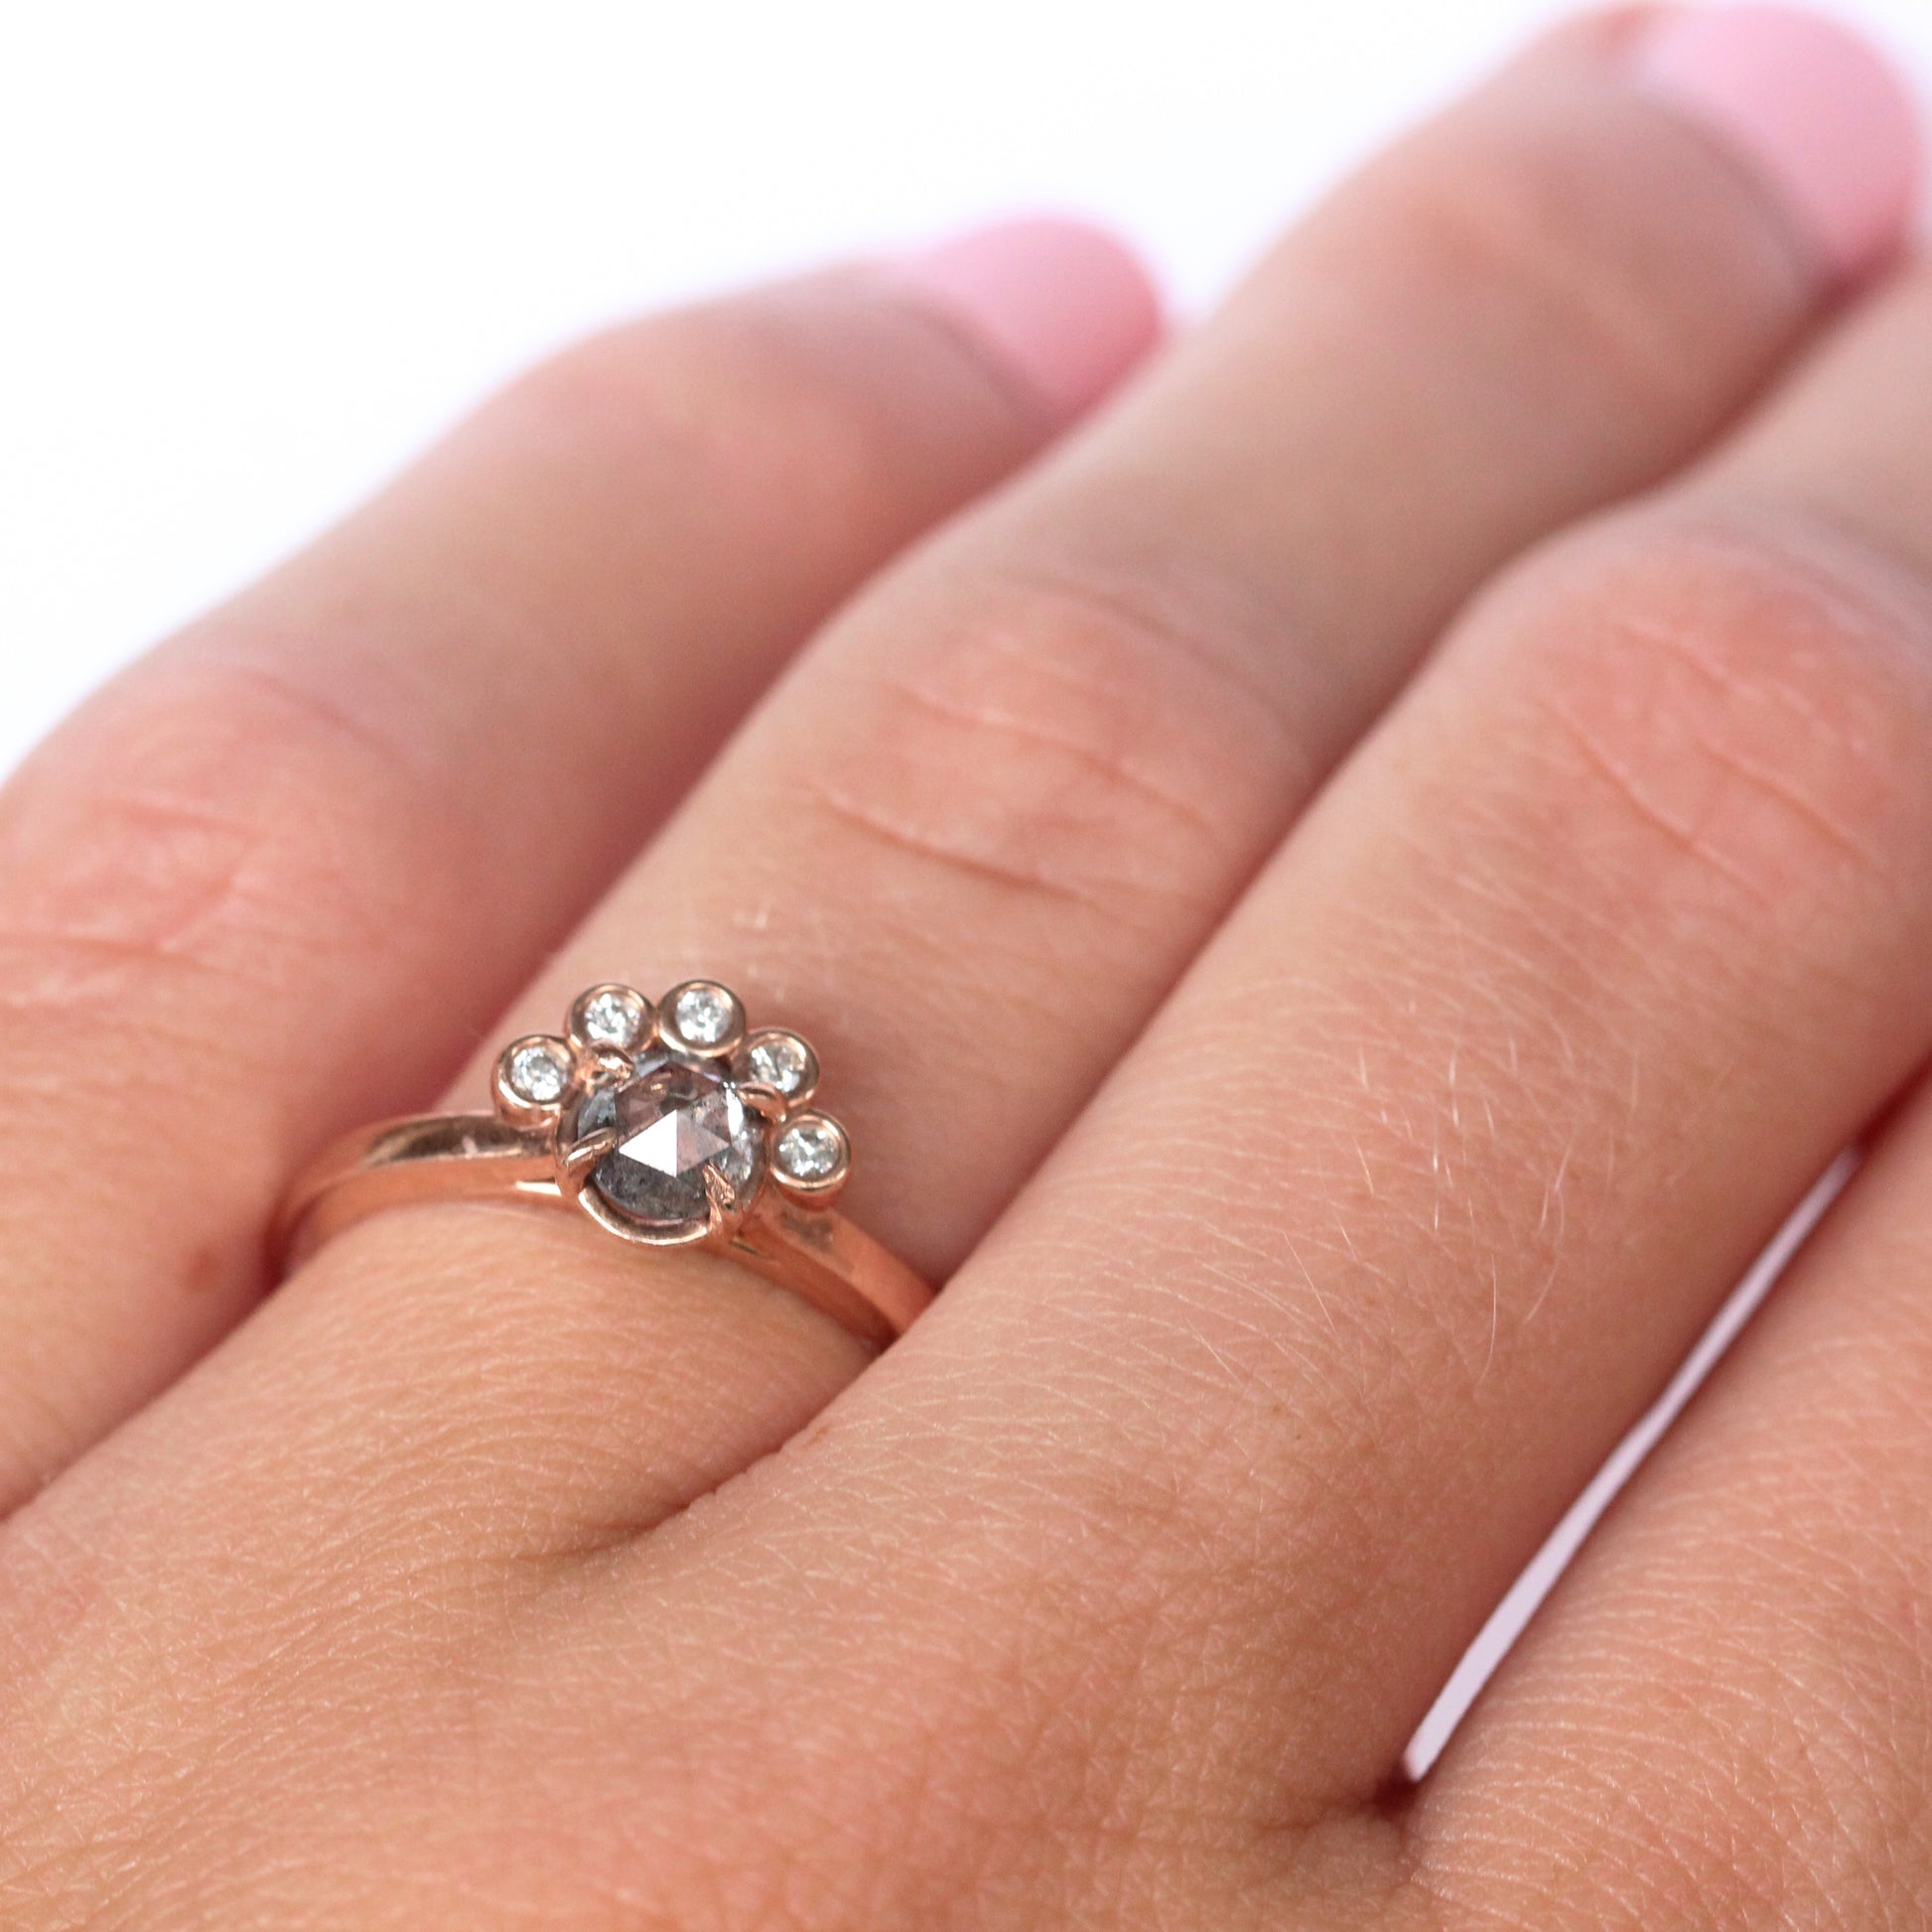 Evegwen Ring with a .45 ct Celestial Diamond® in 10k Rose Gold - Ready to size and ship - Midwinter Co. Alternative Bridal Rings and Modern Fine Jewelry